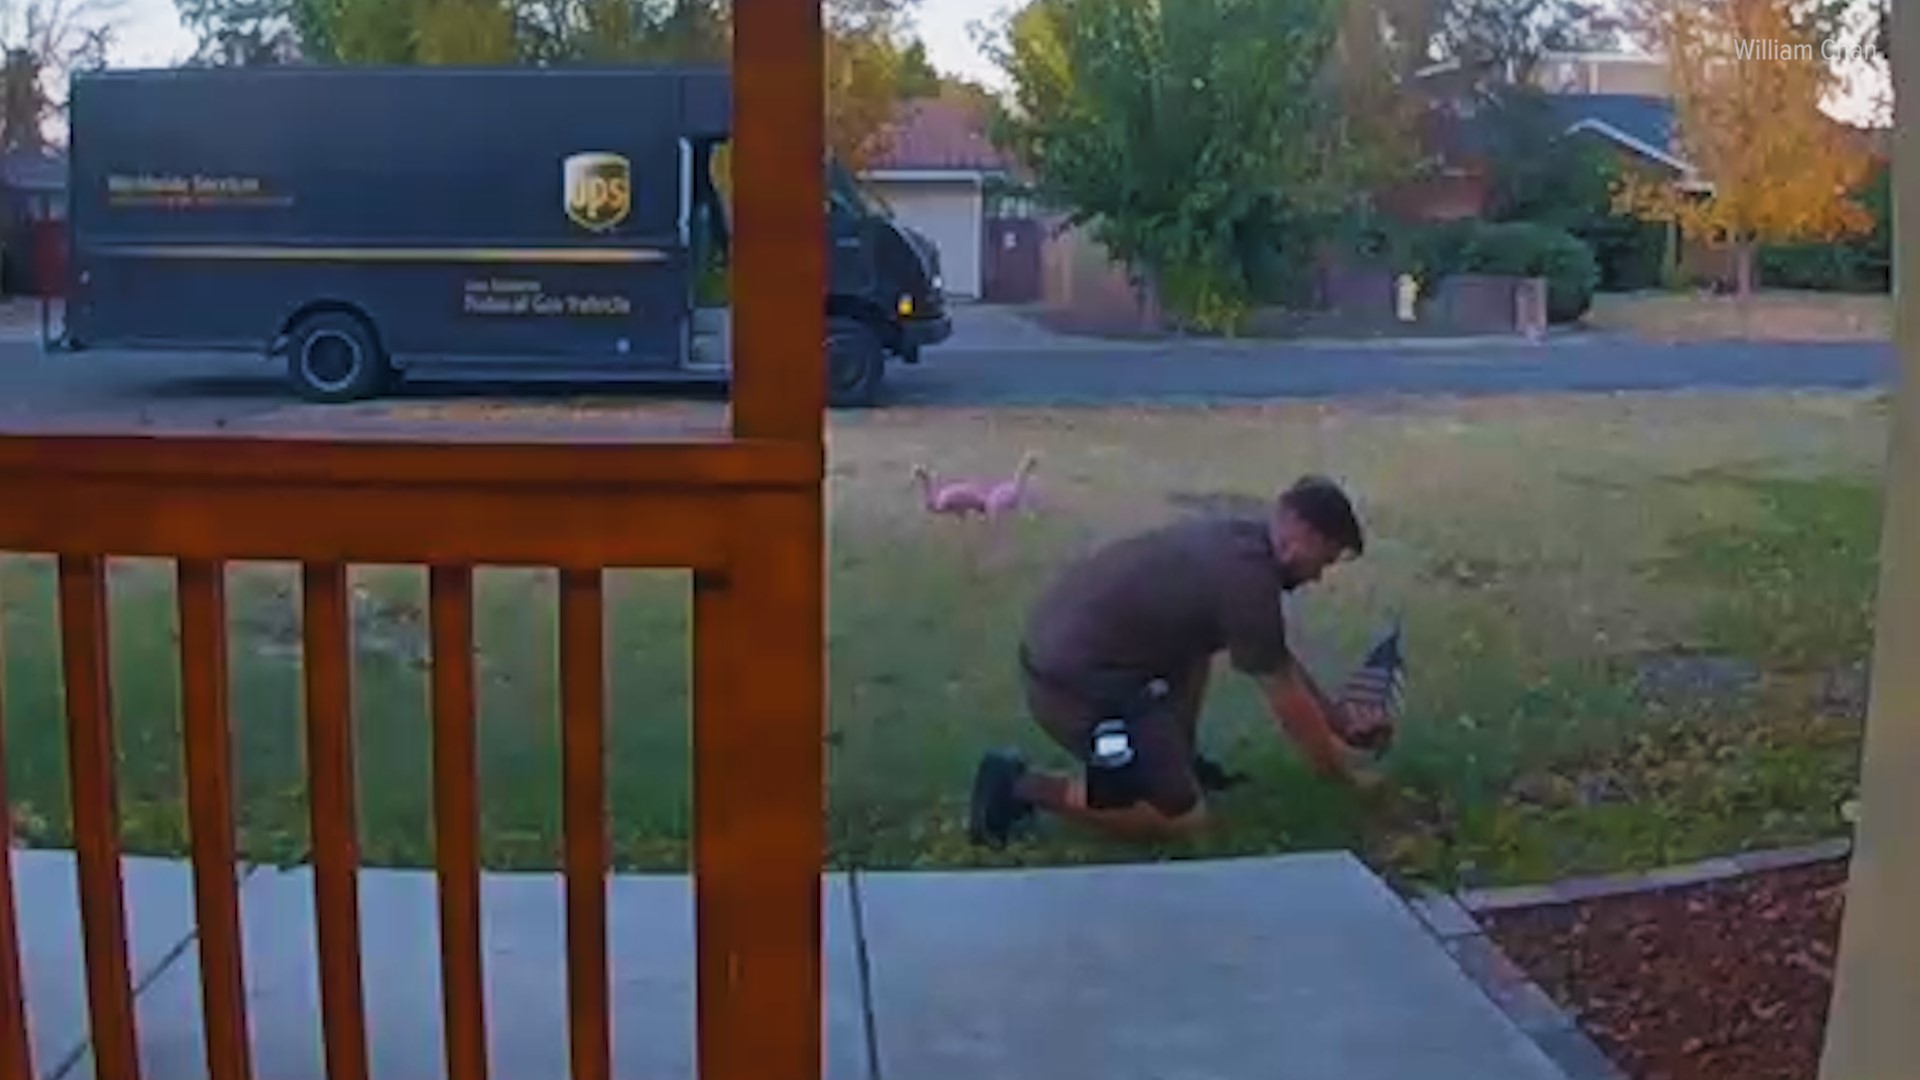 A Sacramento man is praising a UPS delivery driver who went out of his way to fix his American flag while delivering packages.